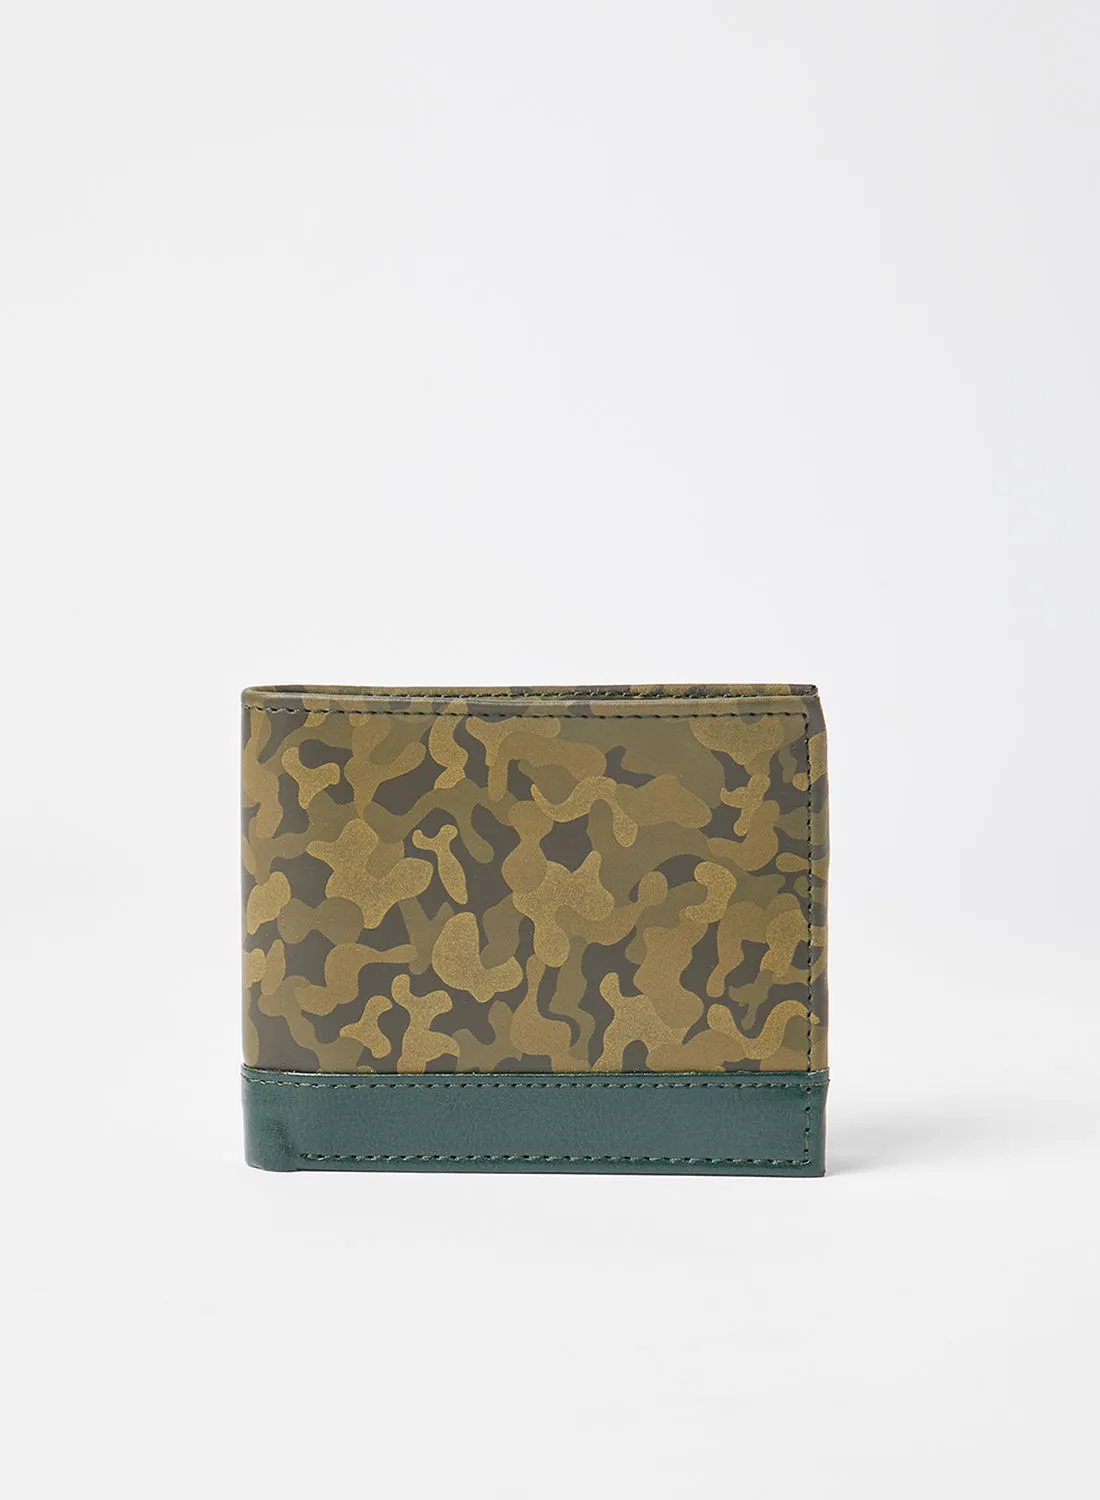 STATE 8 Camouflage Print Wallet أخضر متعدد